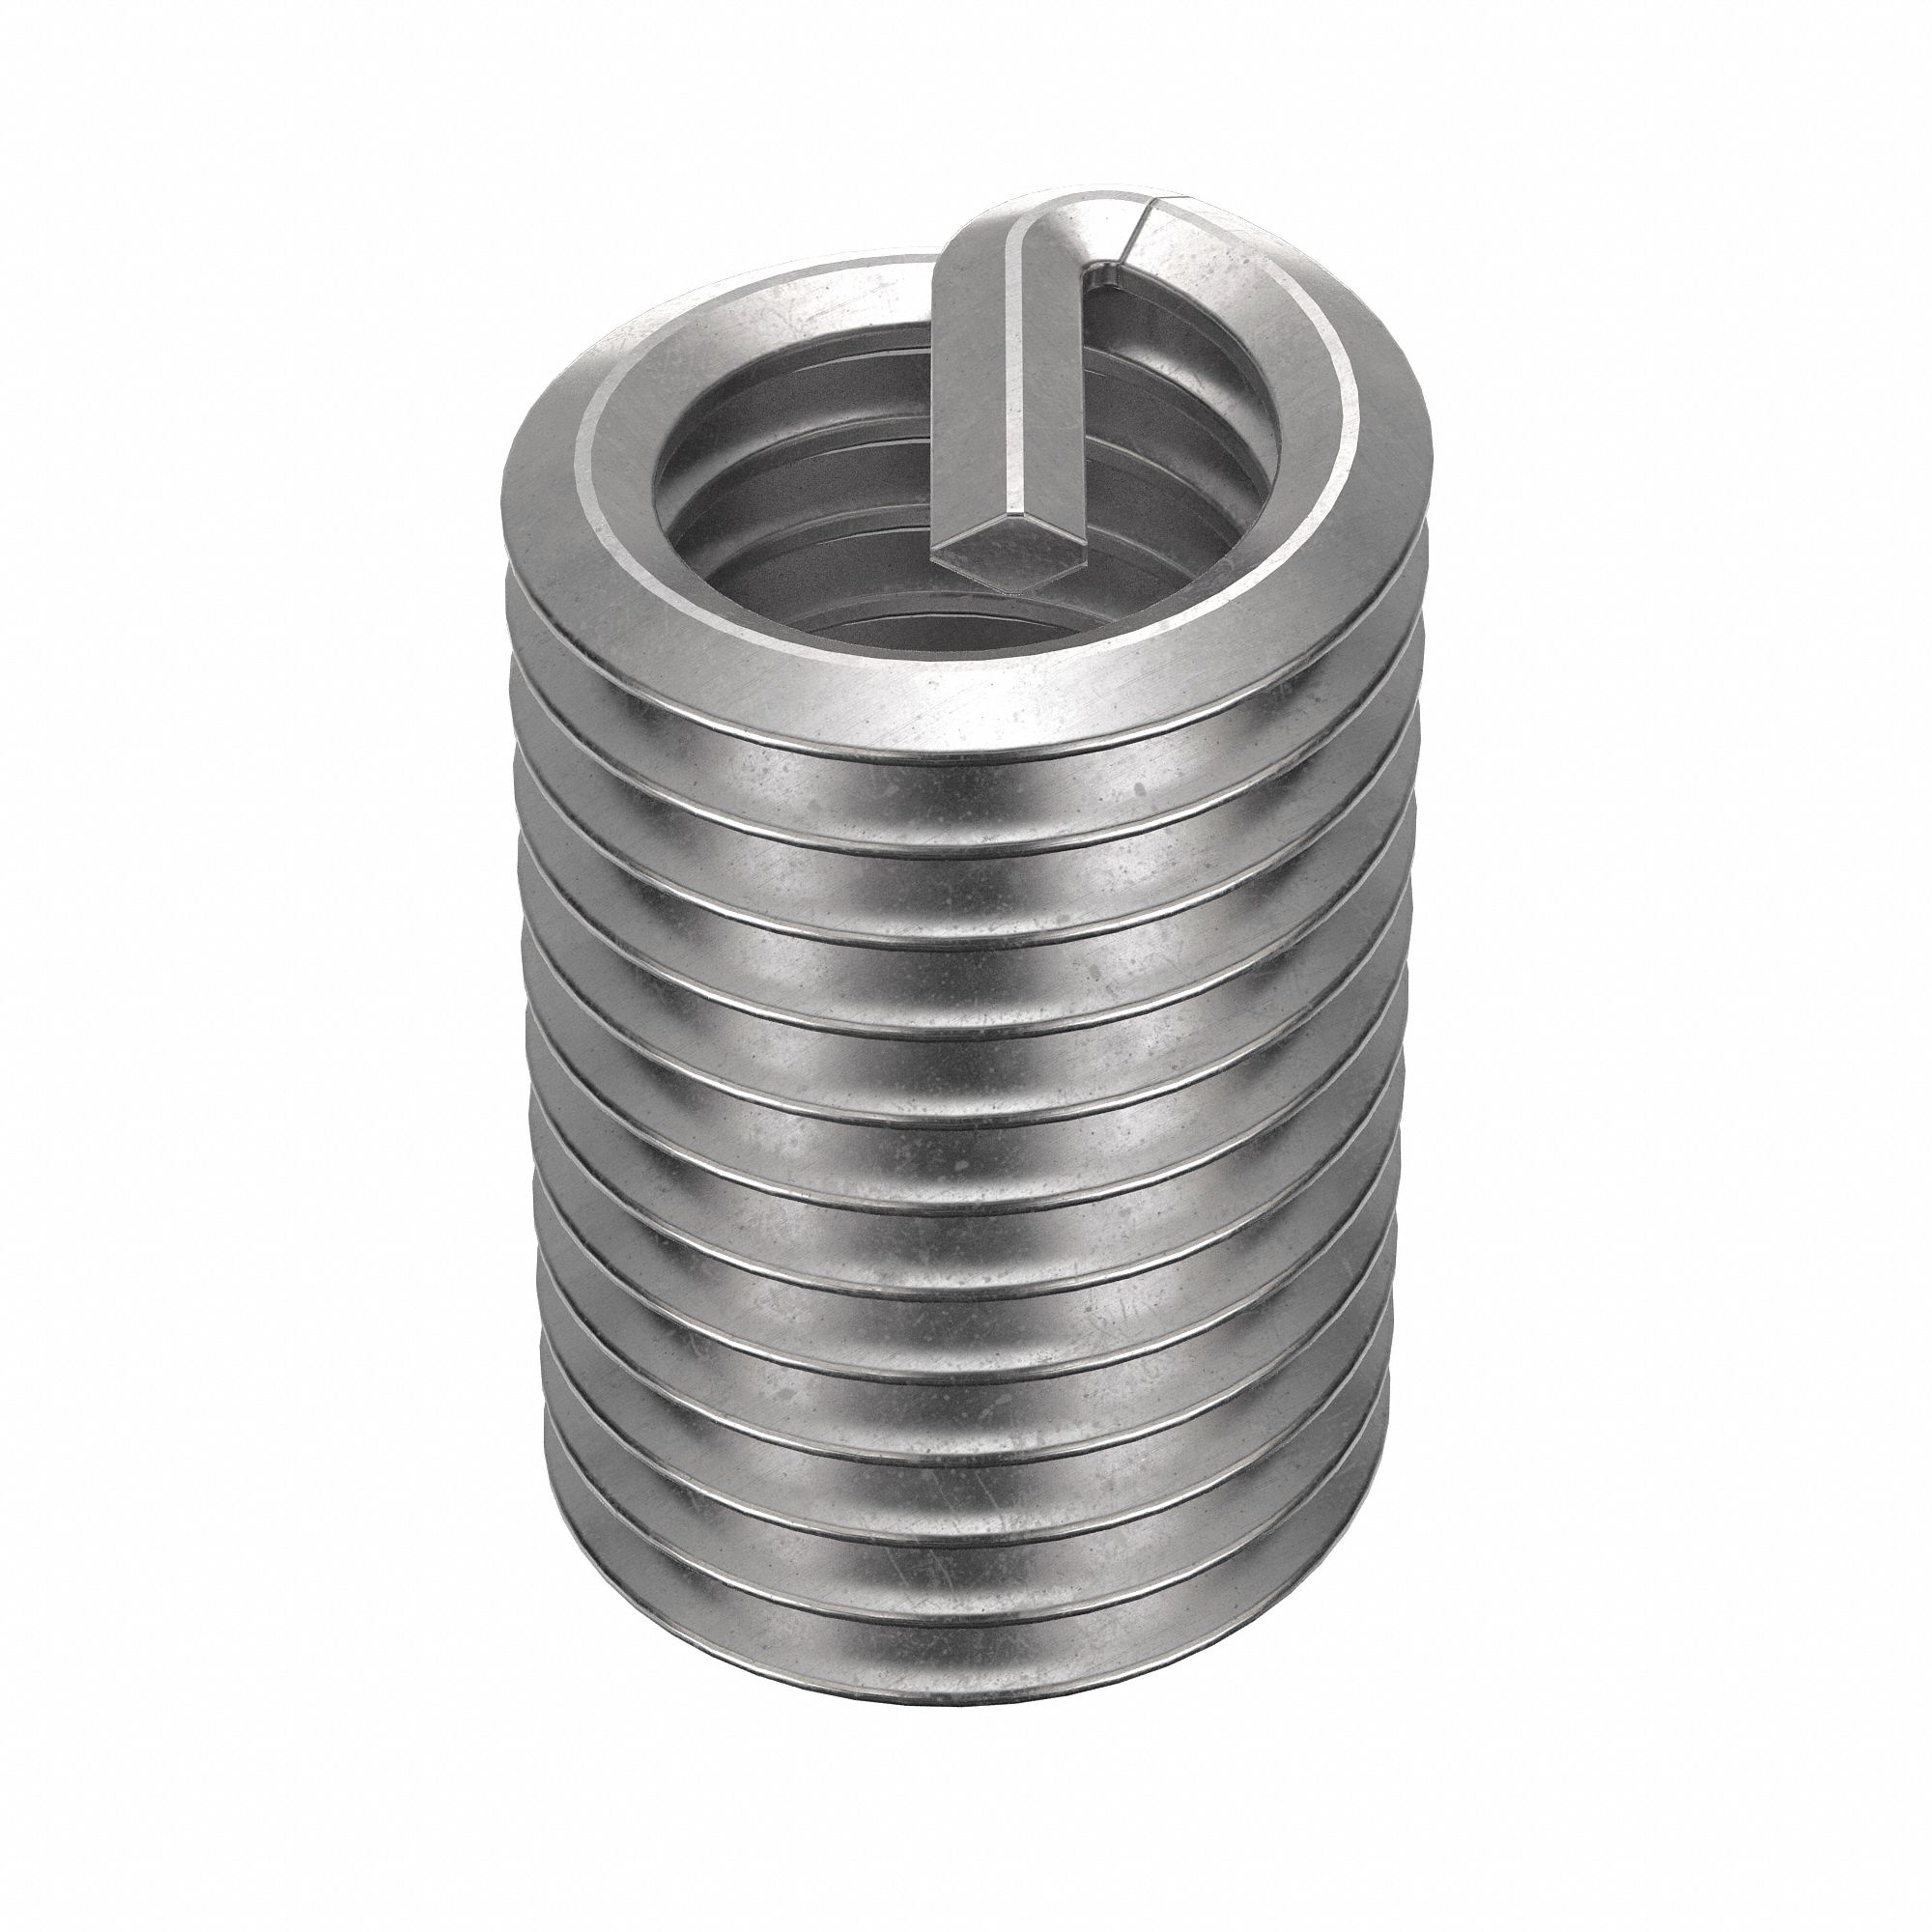 HELI-COIL Thread Repair Kit: Tanged Tang Style, Free-Running, 1/2-13  Thread Size, Stainless Steel